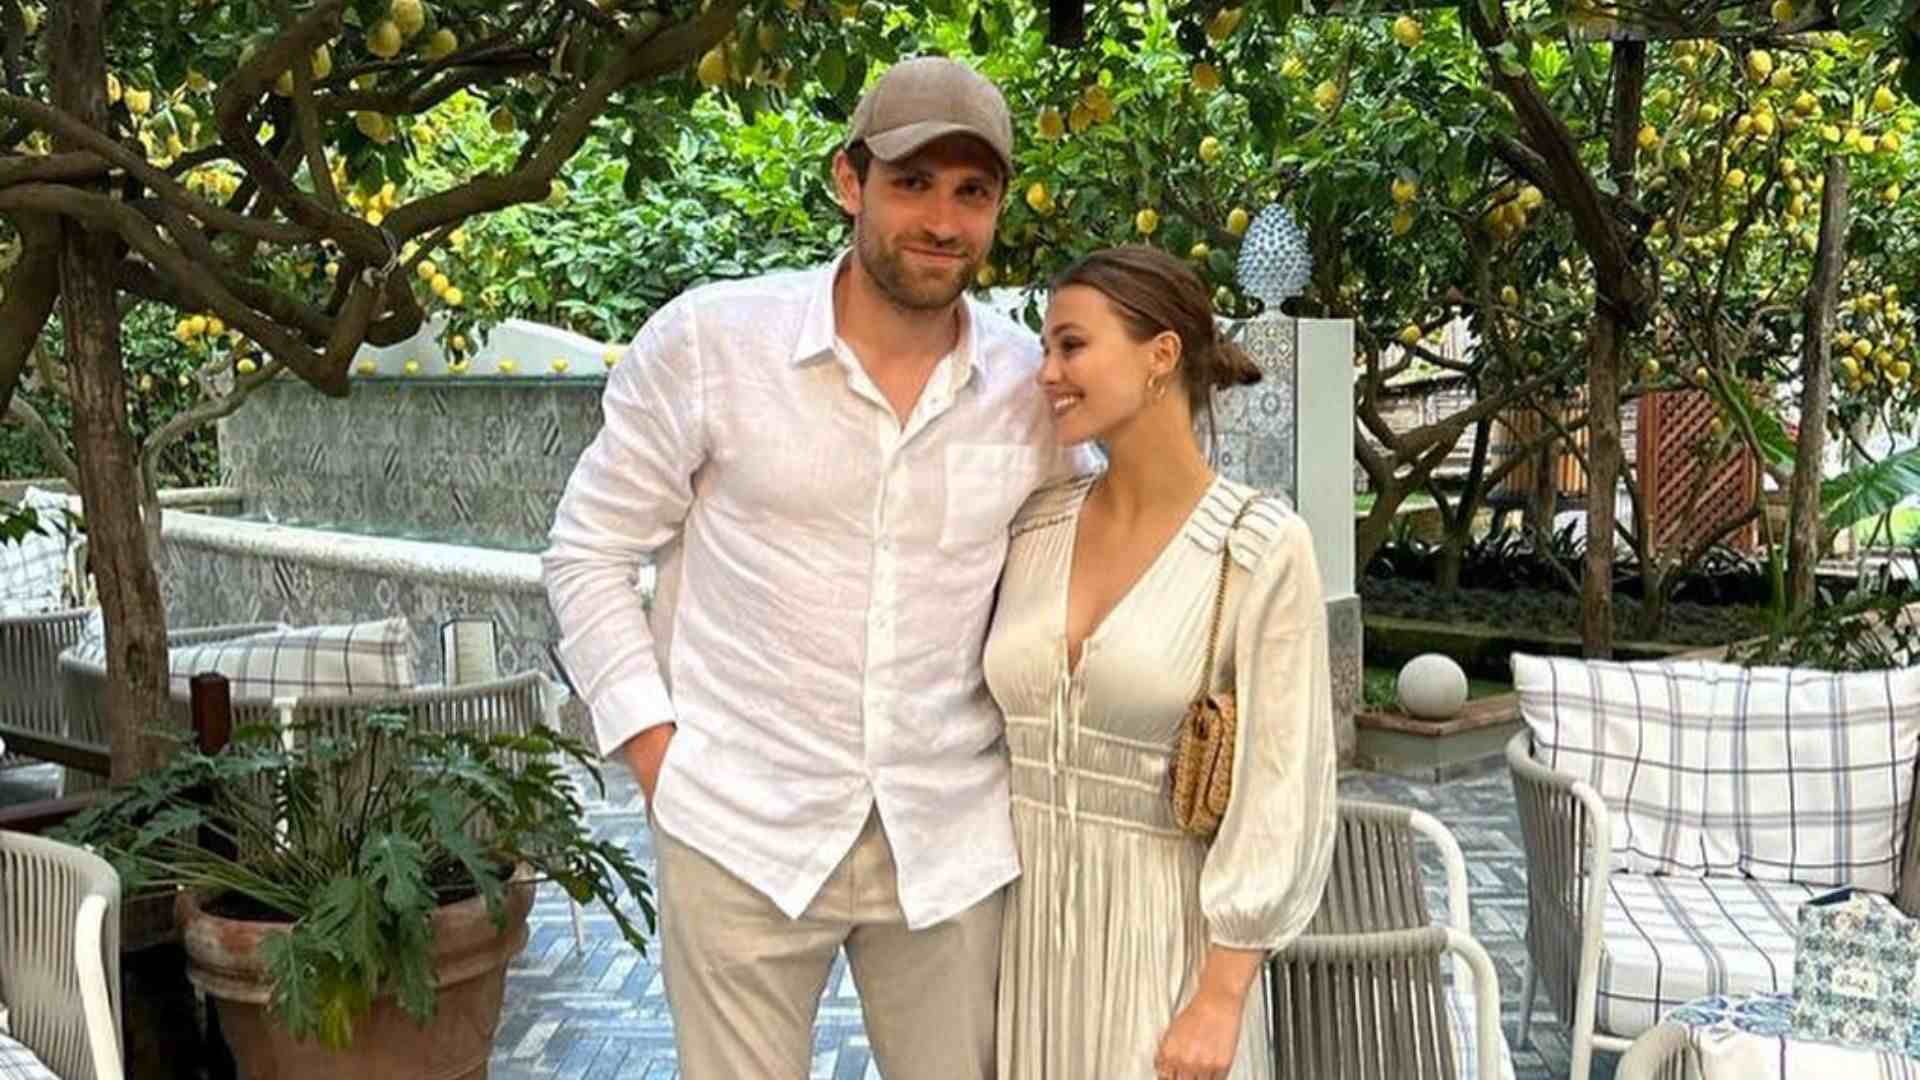 Who is Leon Draisaitl dating? Know all about Celeste Desjardins